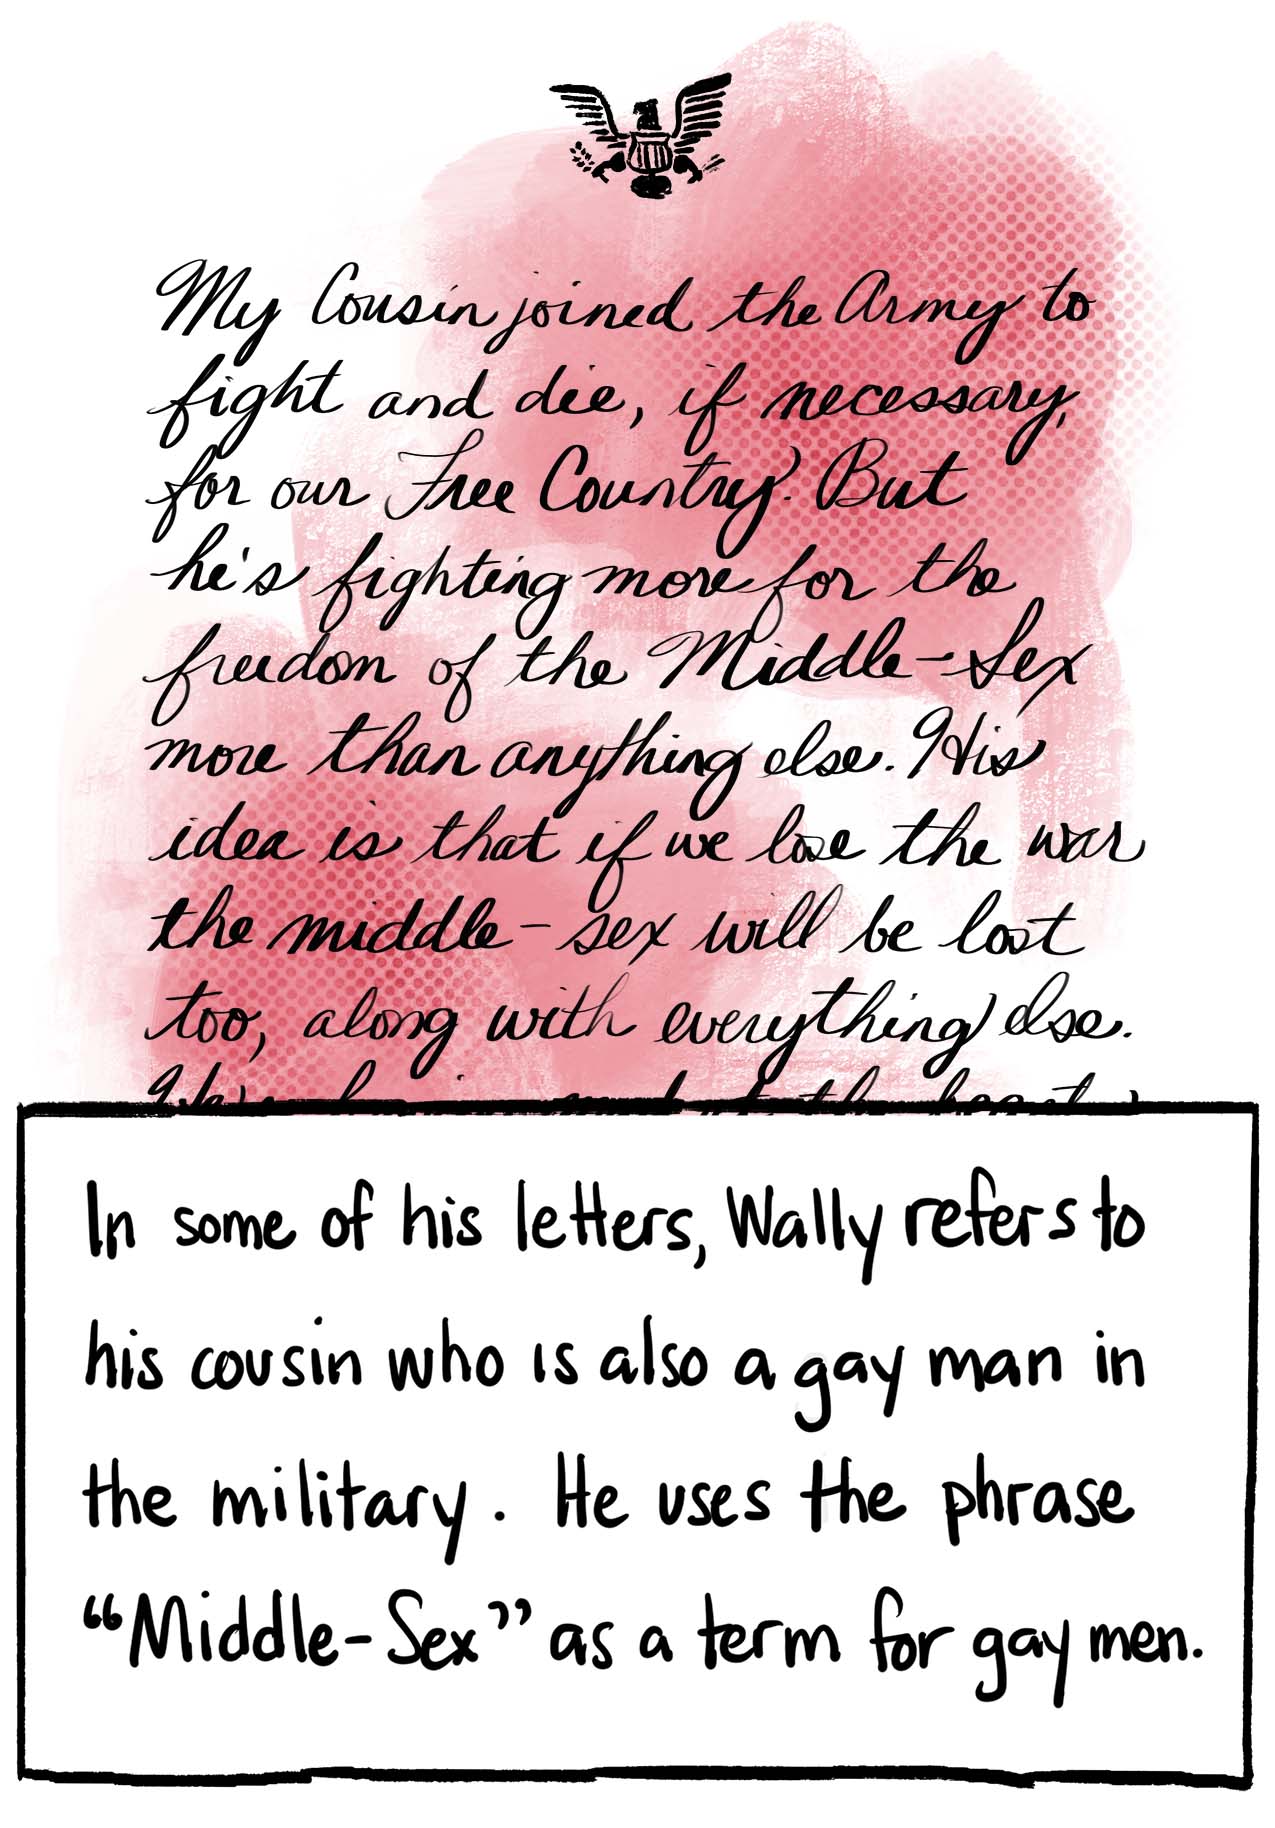 Image of letter: My cousin joined the Army to fight and die, if necessary, for our Free Country. But he’s fighting more for freedom of the Middle-Sex* than anything else. His idea is that if we lose the war the middle-sex will be lost too, along with everything else. Text: In some of his letters, Wally refers to his cousin who is also a gay man in the military. He uses the phrase “Middle-Sex” as a term for gay men.